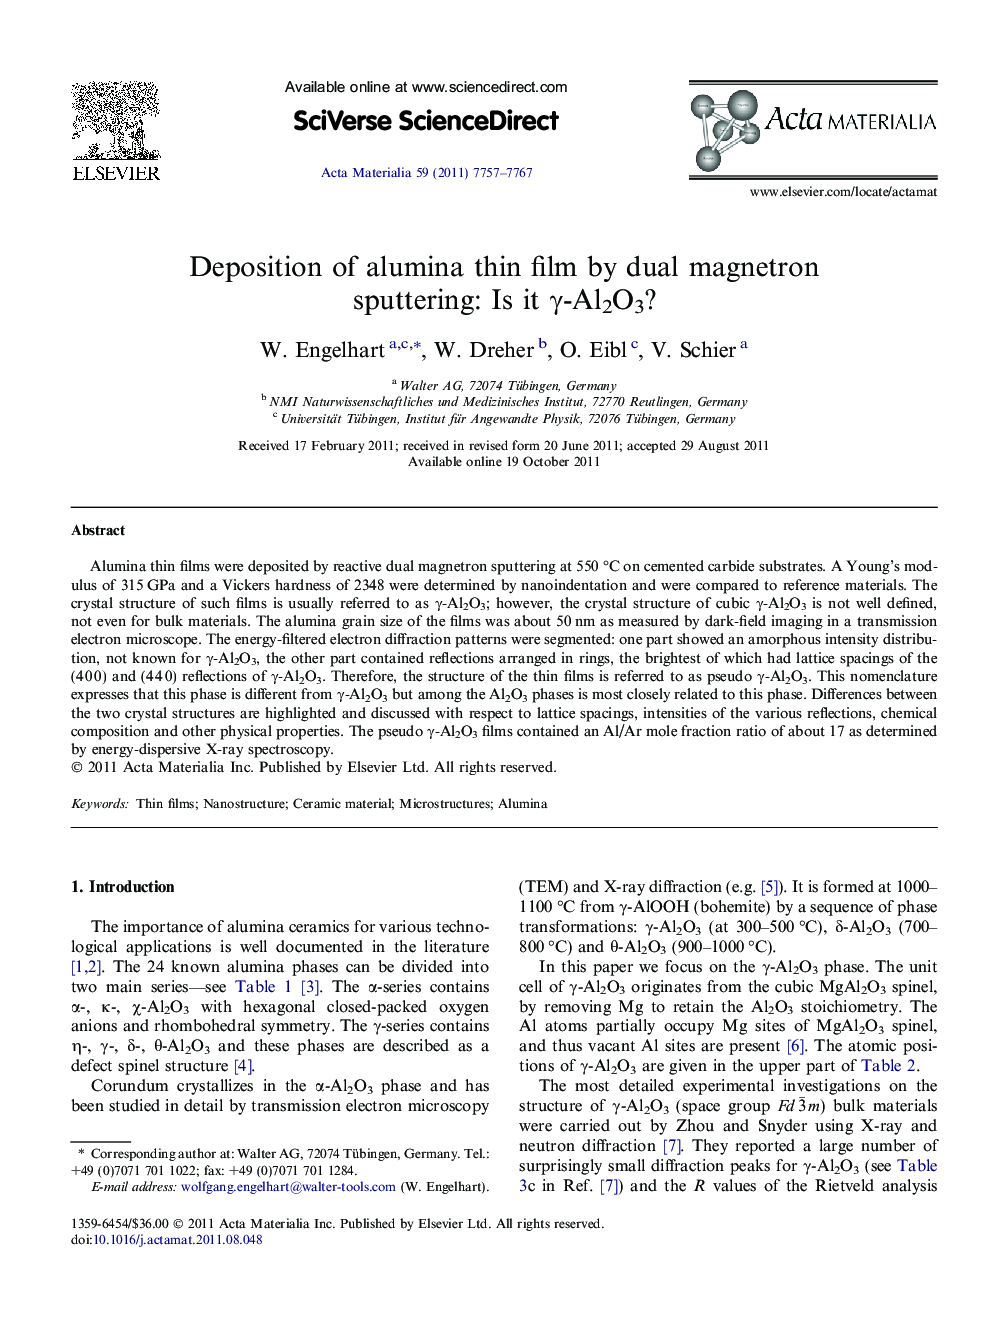 Deposition of alumina thin film by dual magnetron sputtering: Is it Î³-Al2O3?